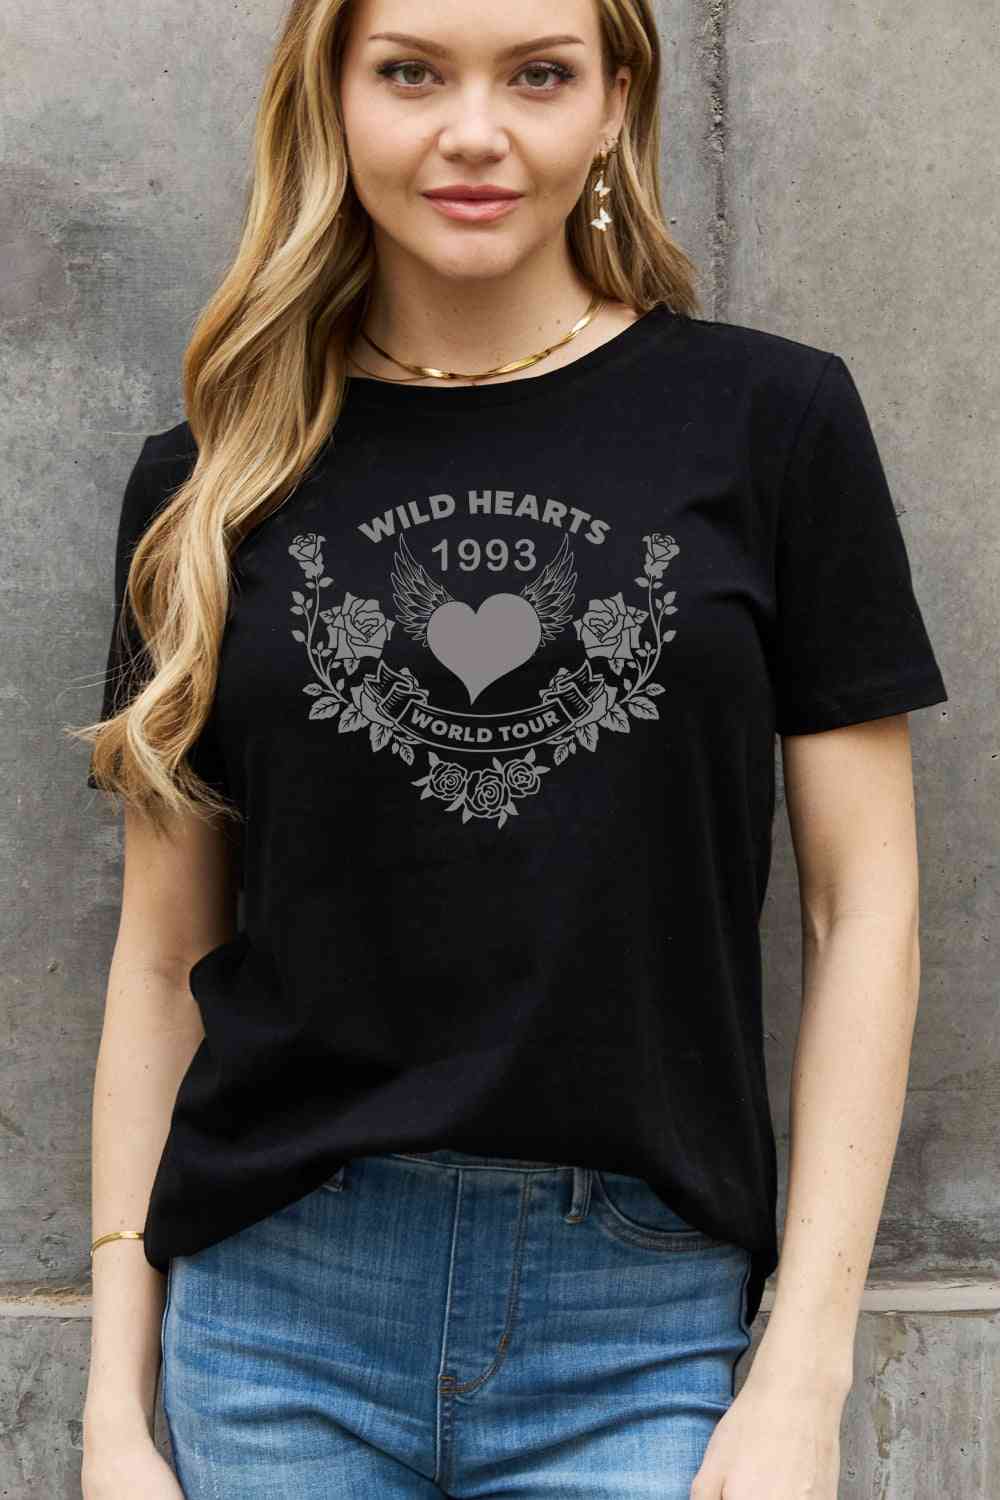 Simply Love Full Size WILD HEARTS 1993 WORLD TOUR Graphic Cotton Tee Black